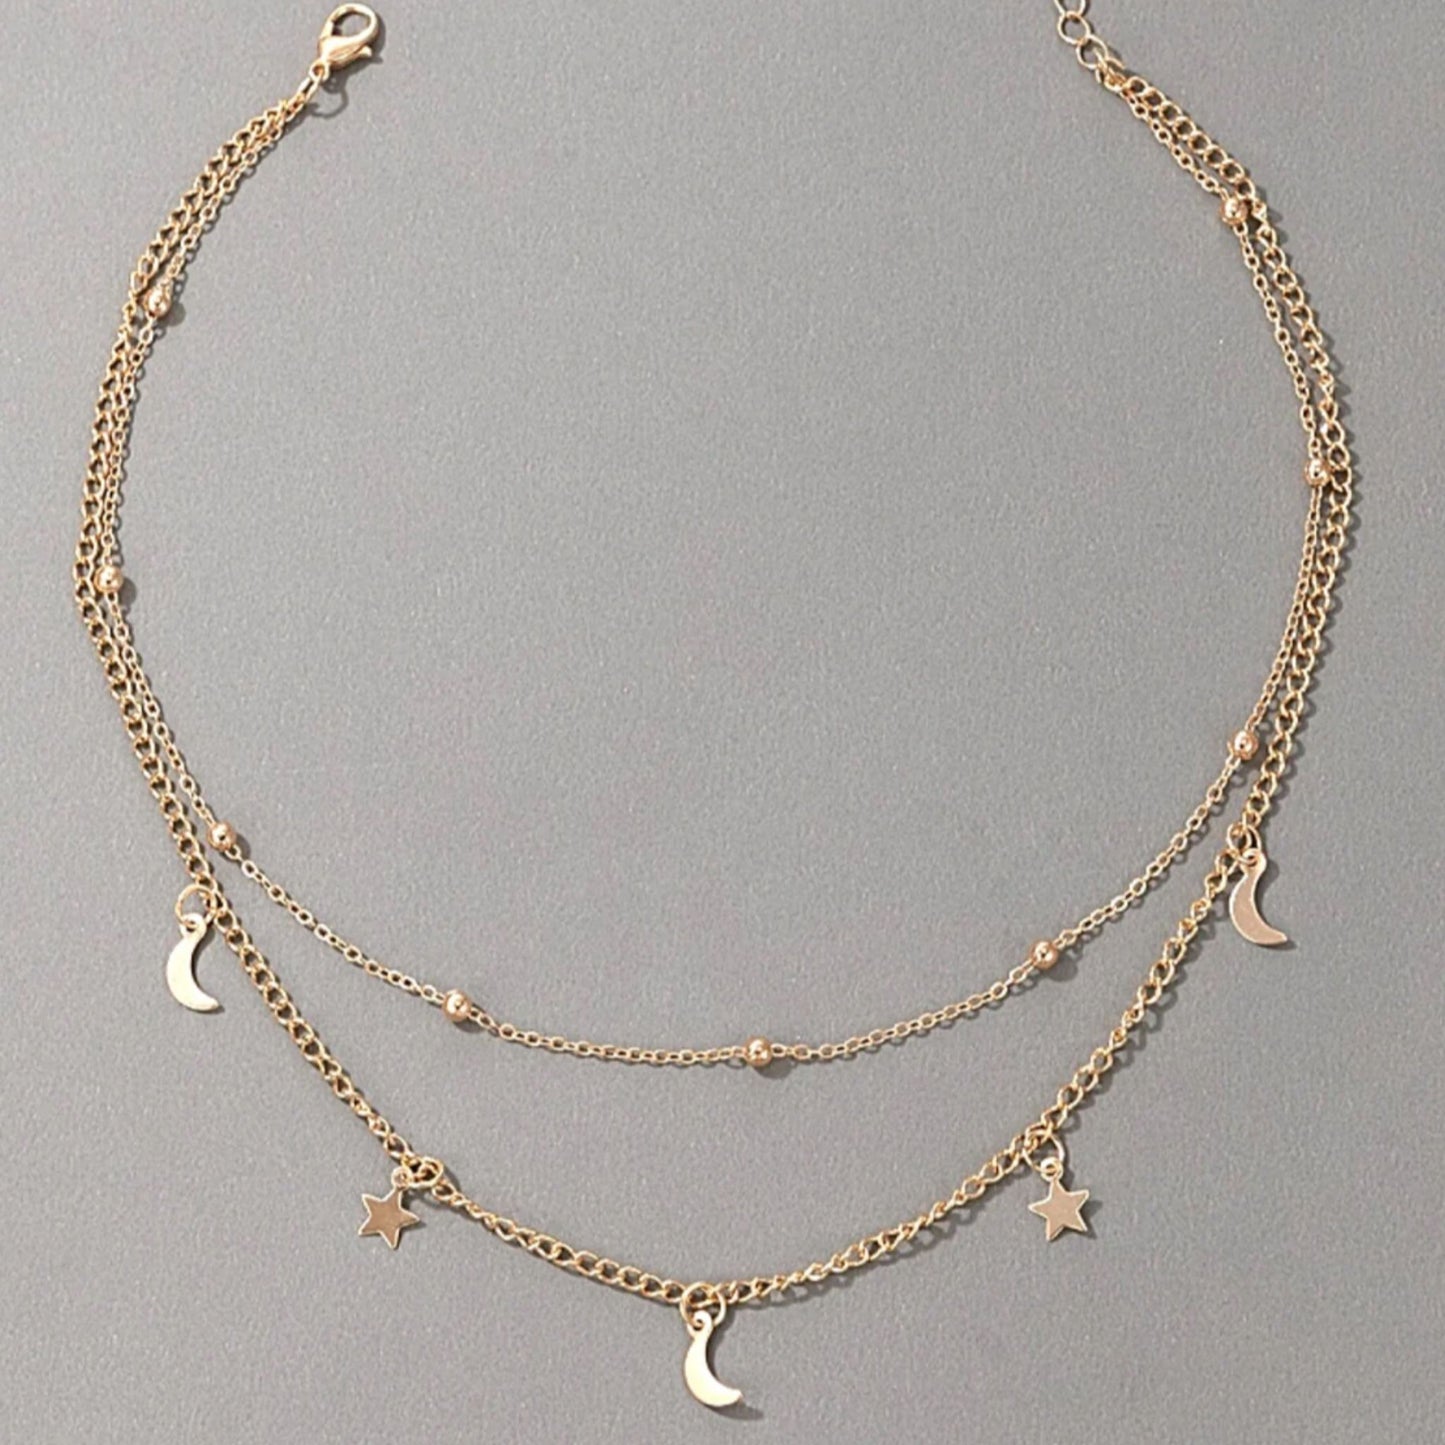 Celestial Moon and Star Charm Choker Necklace.